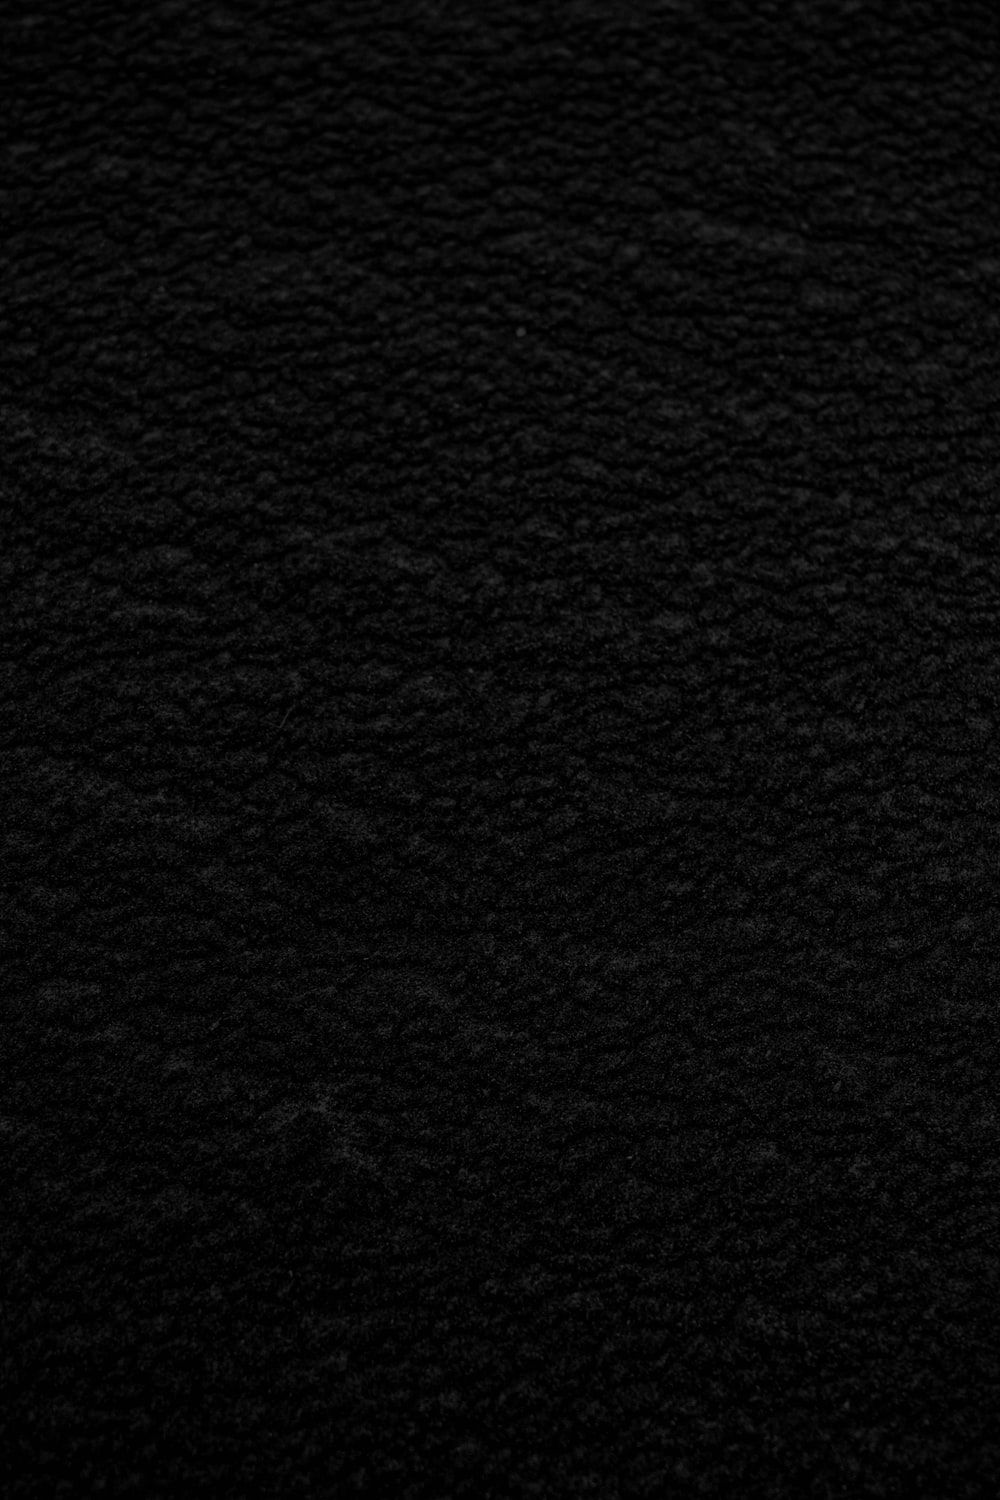 Black Texture Picture [HQ]. Download Free Image